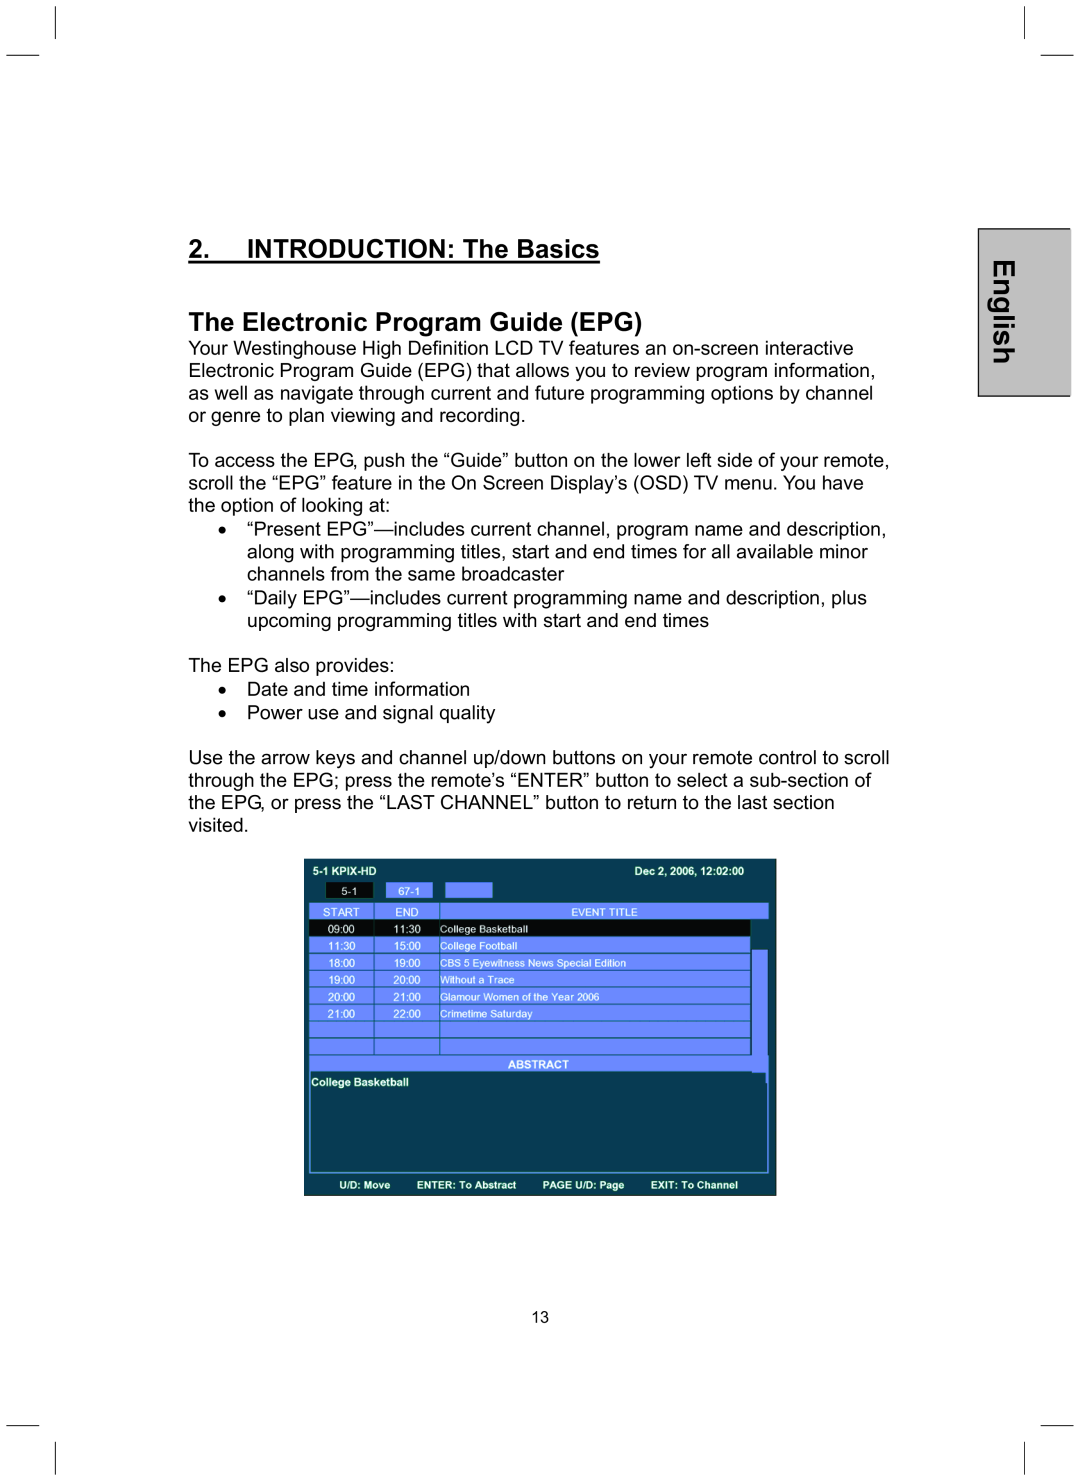 Westinghouse TX-52H480S user manual INTRODUCTION The Basics The Electronic Program Guide EPG, English 